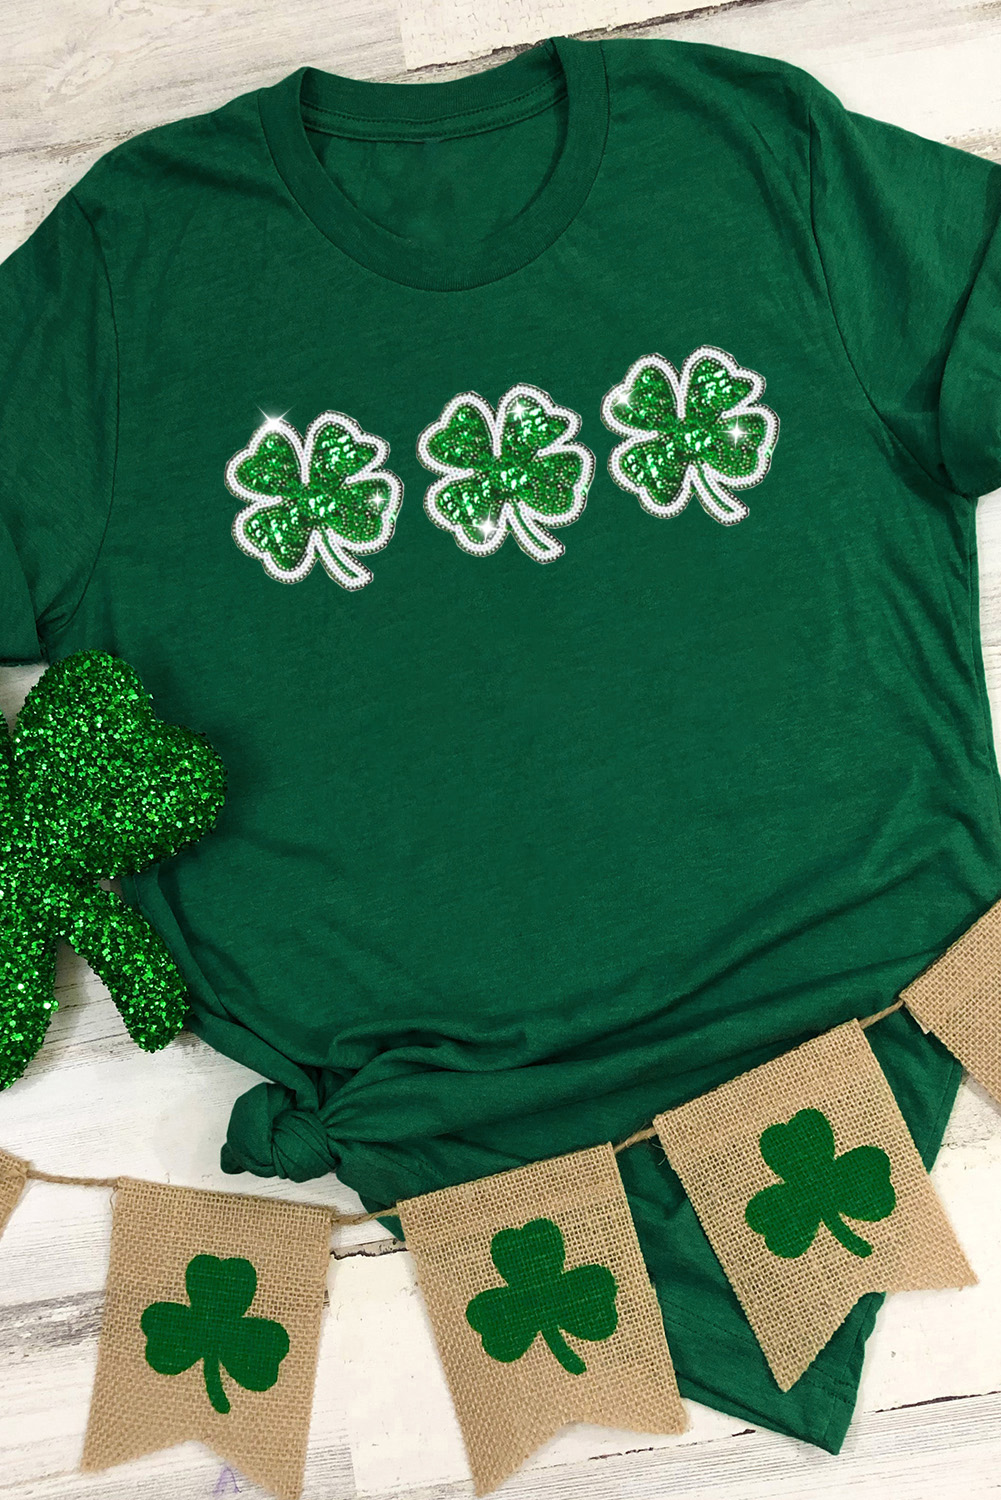 Shewin Wholesale Chic Lady Green St Patrick Clover Patch Sequin Graphic T SHIRT